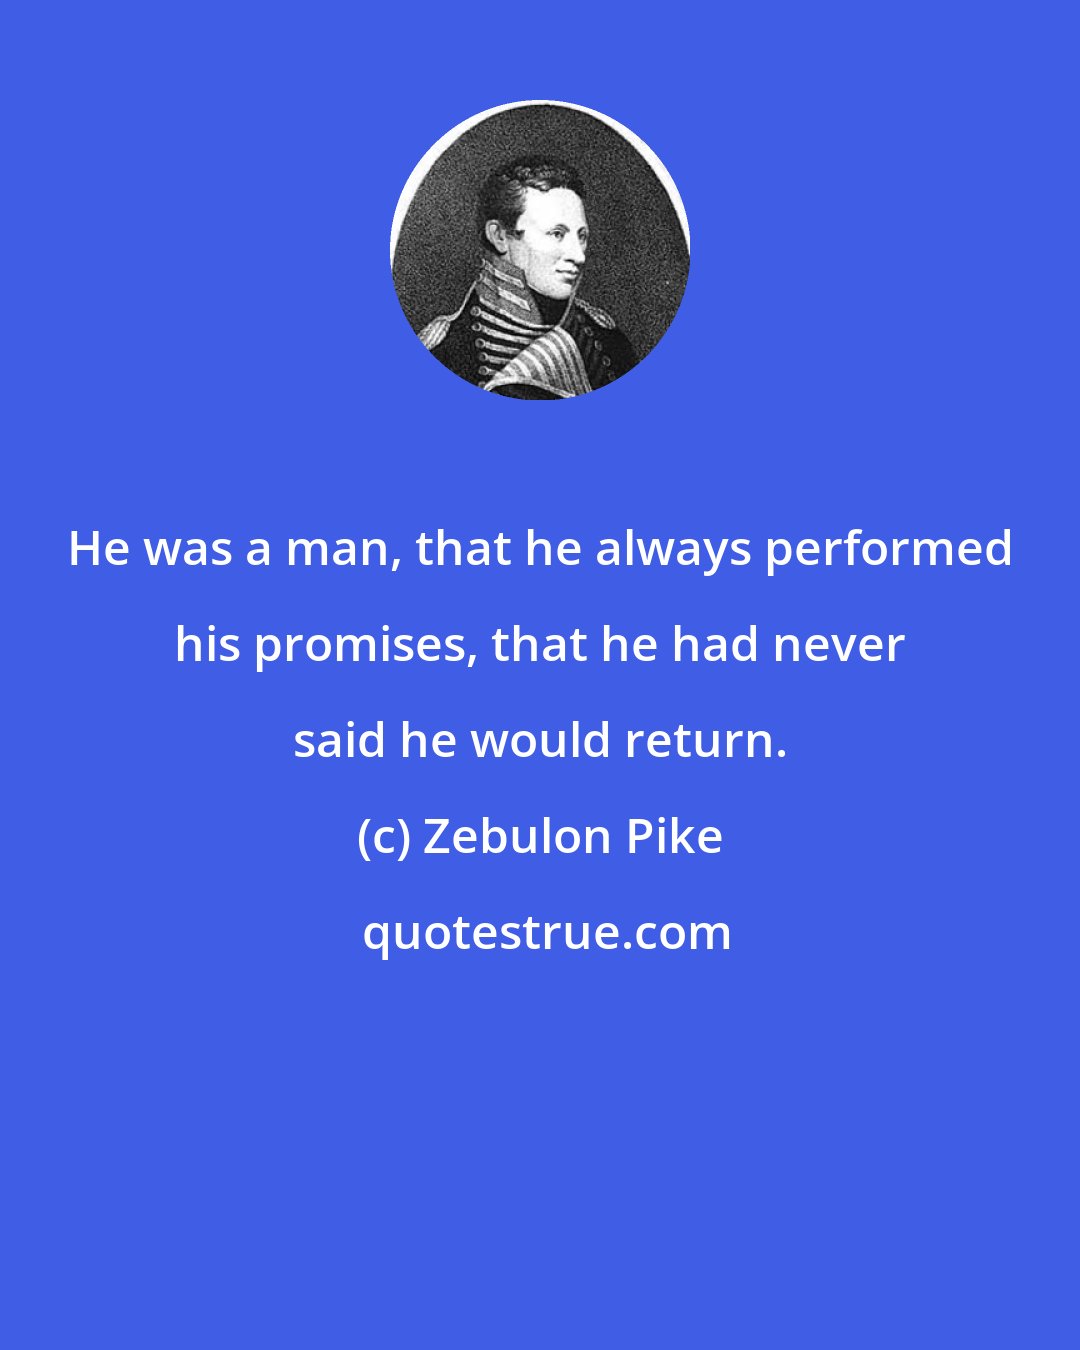 Zebulon Pike: He was a man, that he always performed his promises, that he had never said he would return.